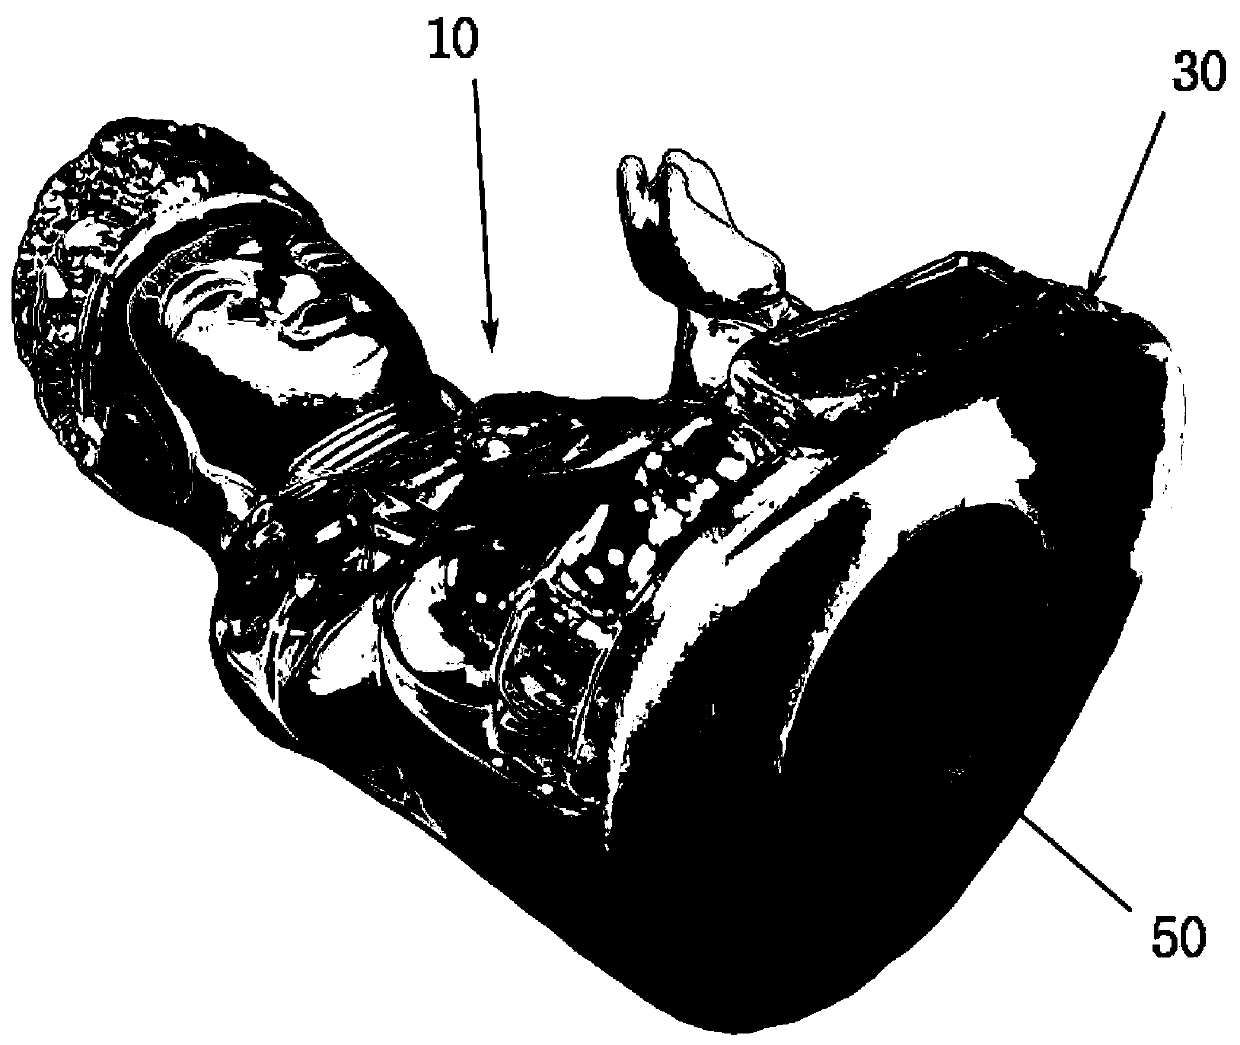 Buddha-shaped pottery containing ashes and method for manufacturing the same